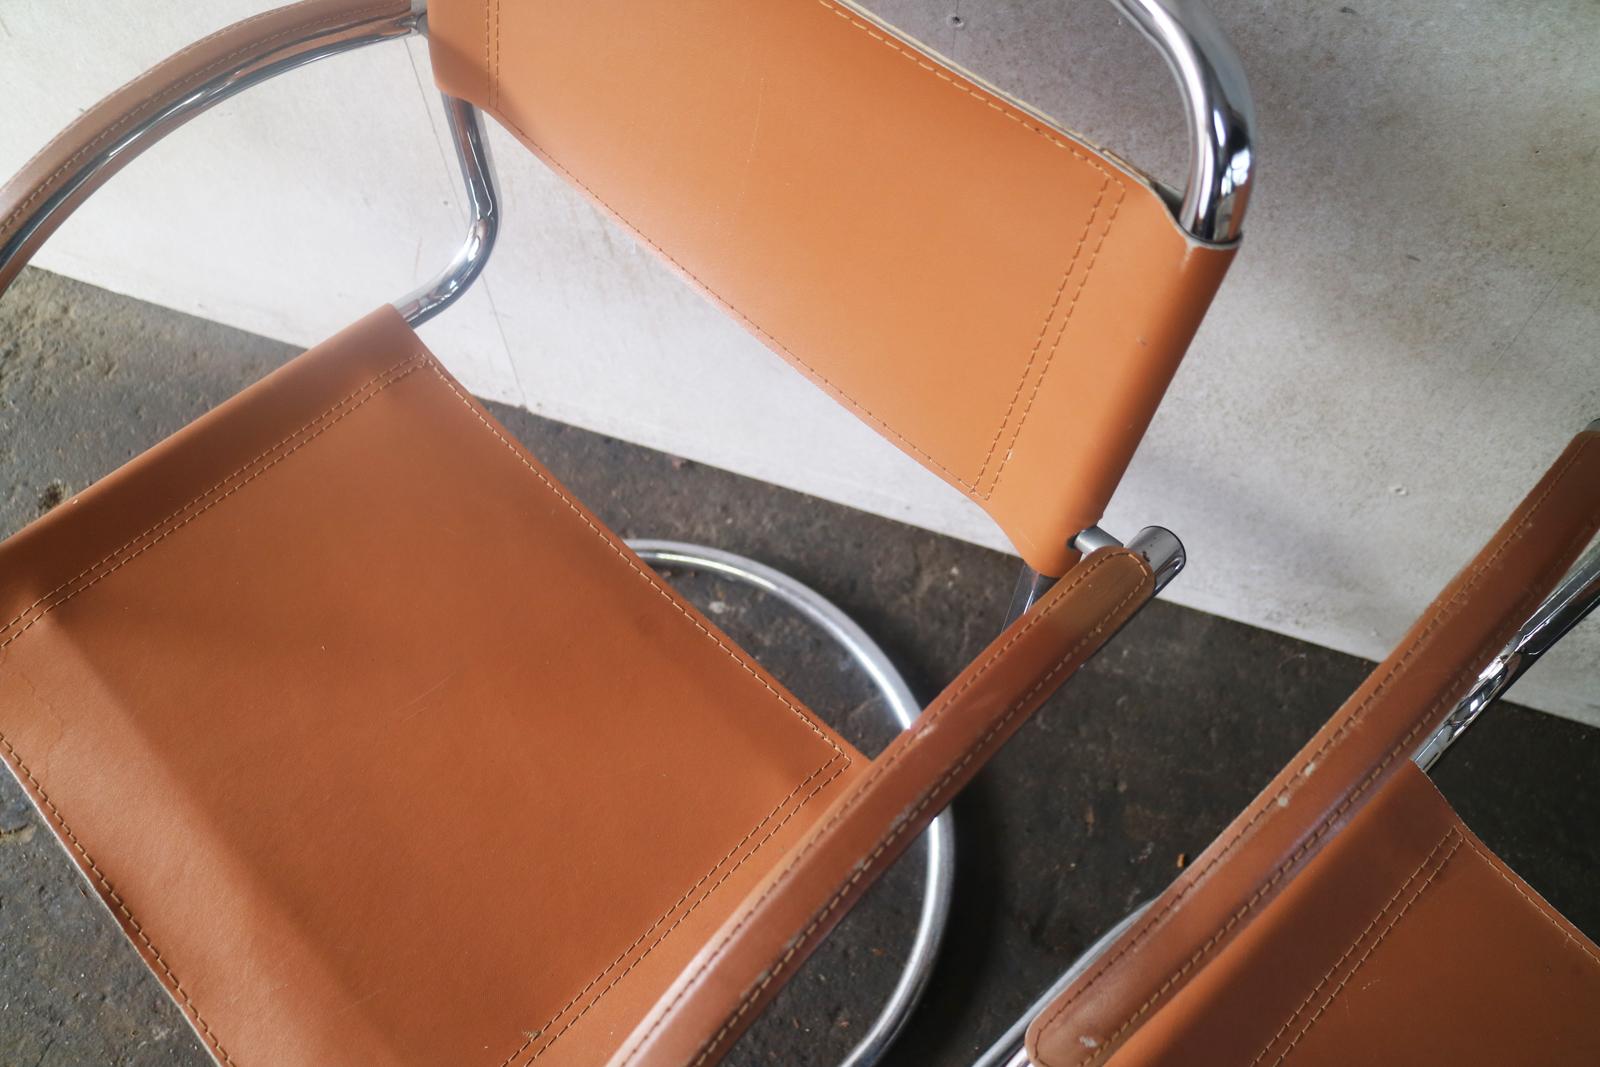 A set of very smart six Mid-Century Modern chairs, for dining or equally good for a meeting or conference table. Tan leather with tubular chrome-plated metal frame

Country of origin: Italy
Date of manufacture: 1970s 
Material: Leather and